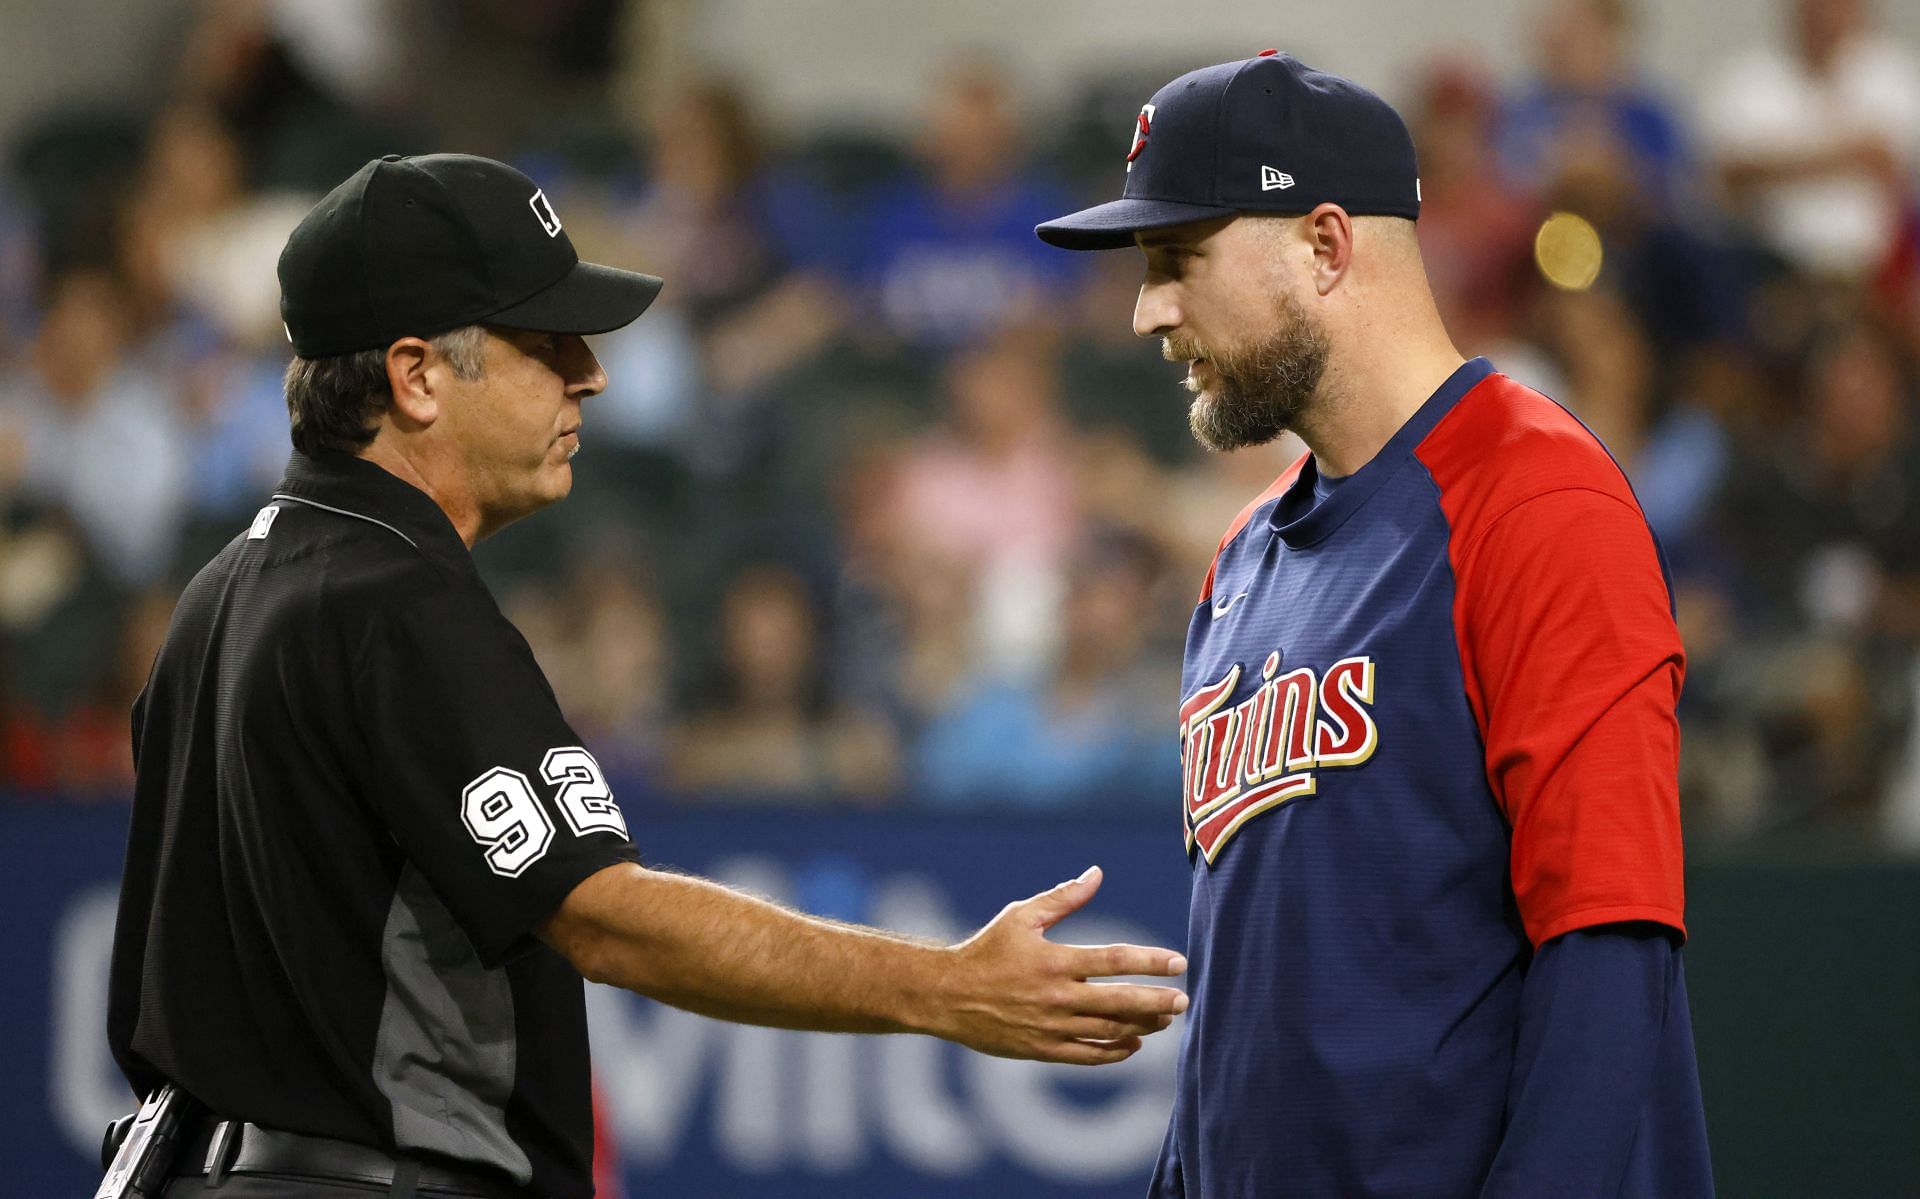 Manager Rocco Baldelli of the Minnesota Twins talks with the umpire during a game in Arlington, Texas.